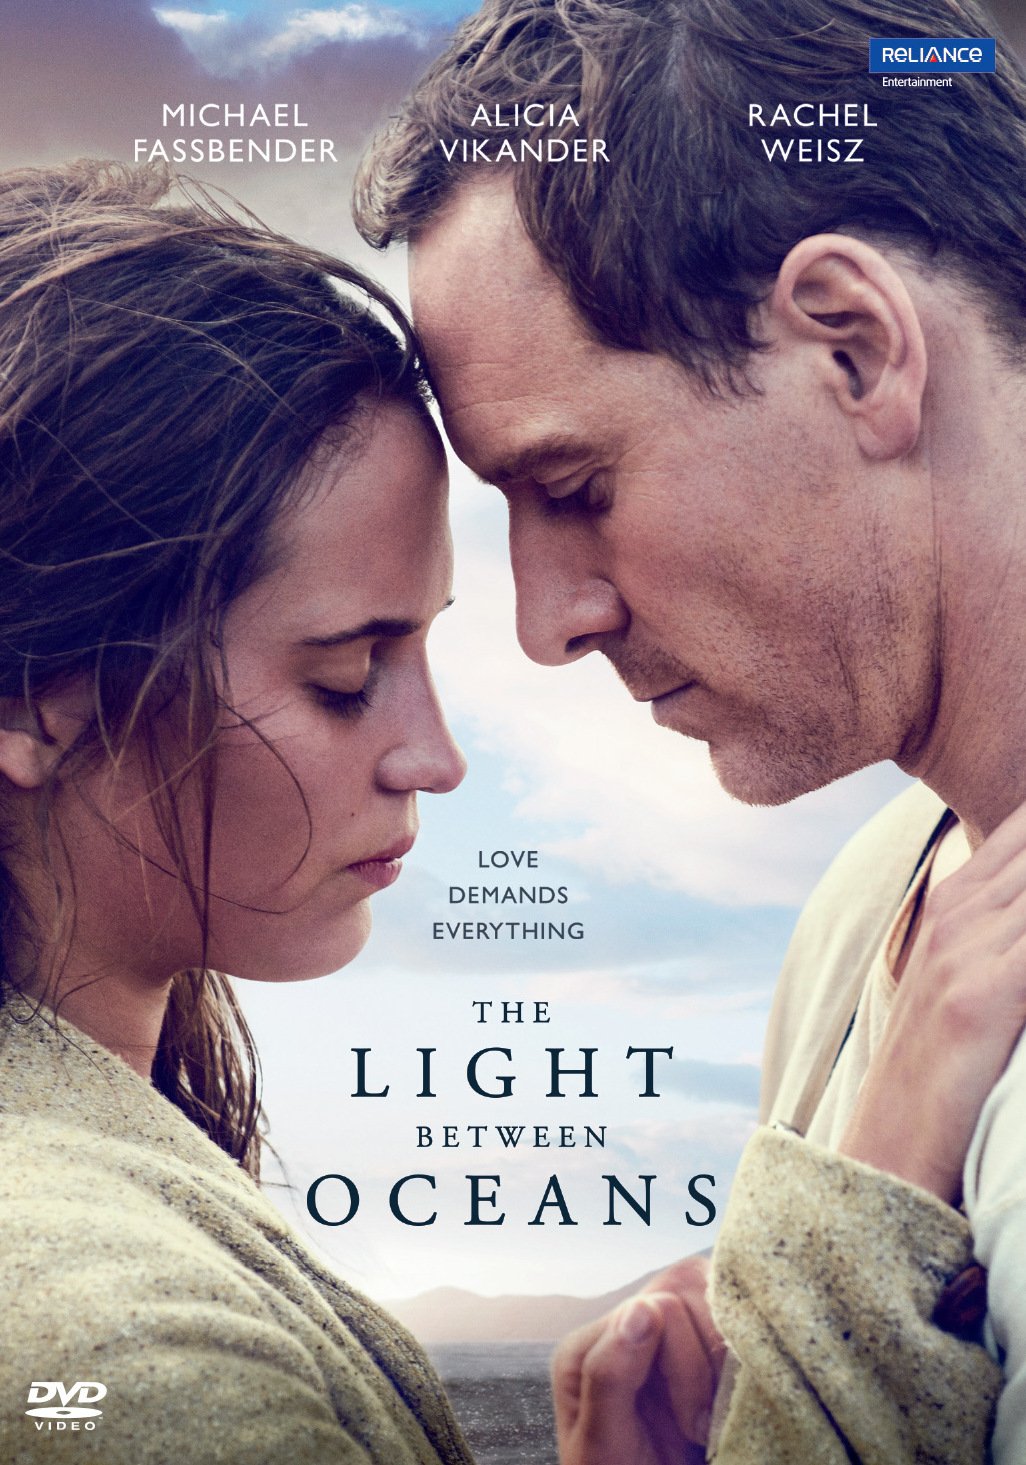 the-light-between-oceans-movie-purchase-or-watch-online